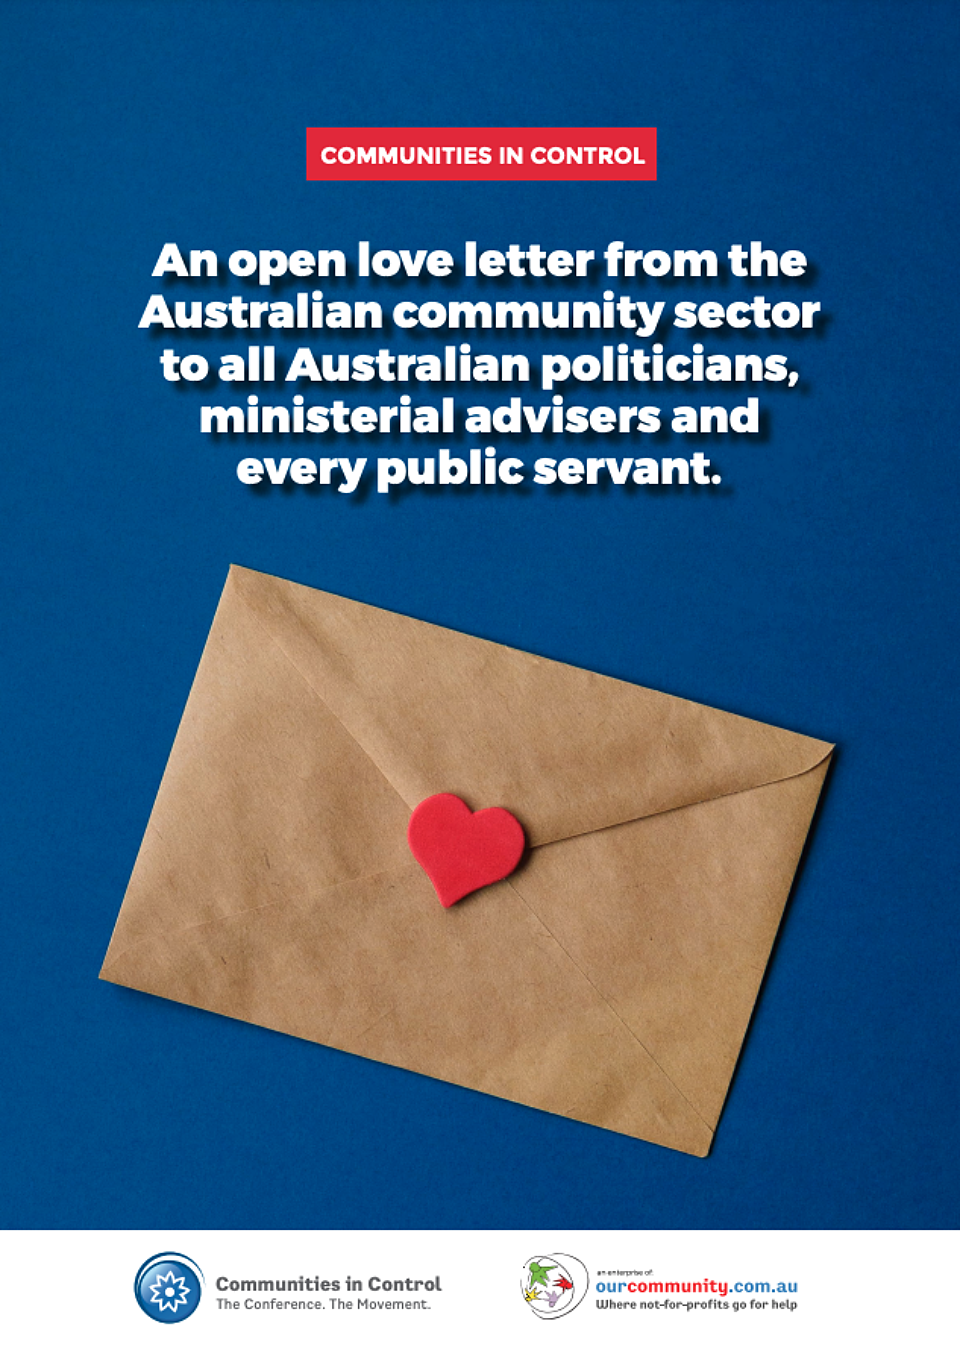 An open love letter from the Australian community sector to all Australian politicians, ministerial advisers and every public servant.